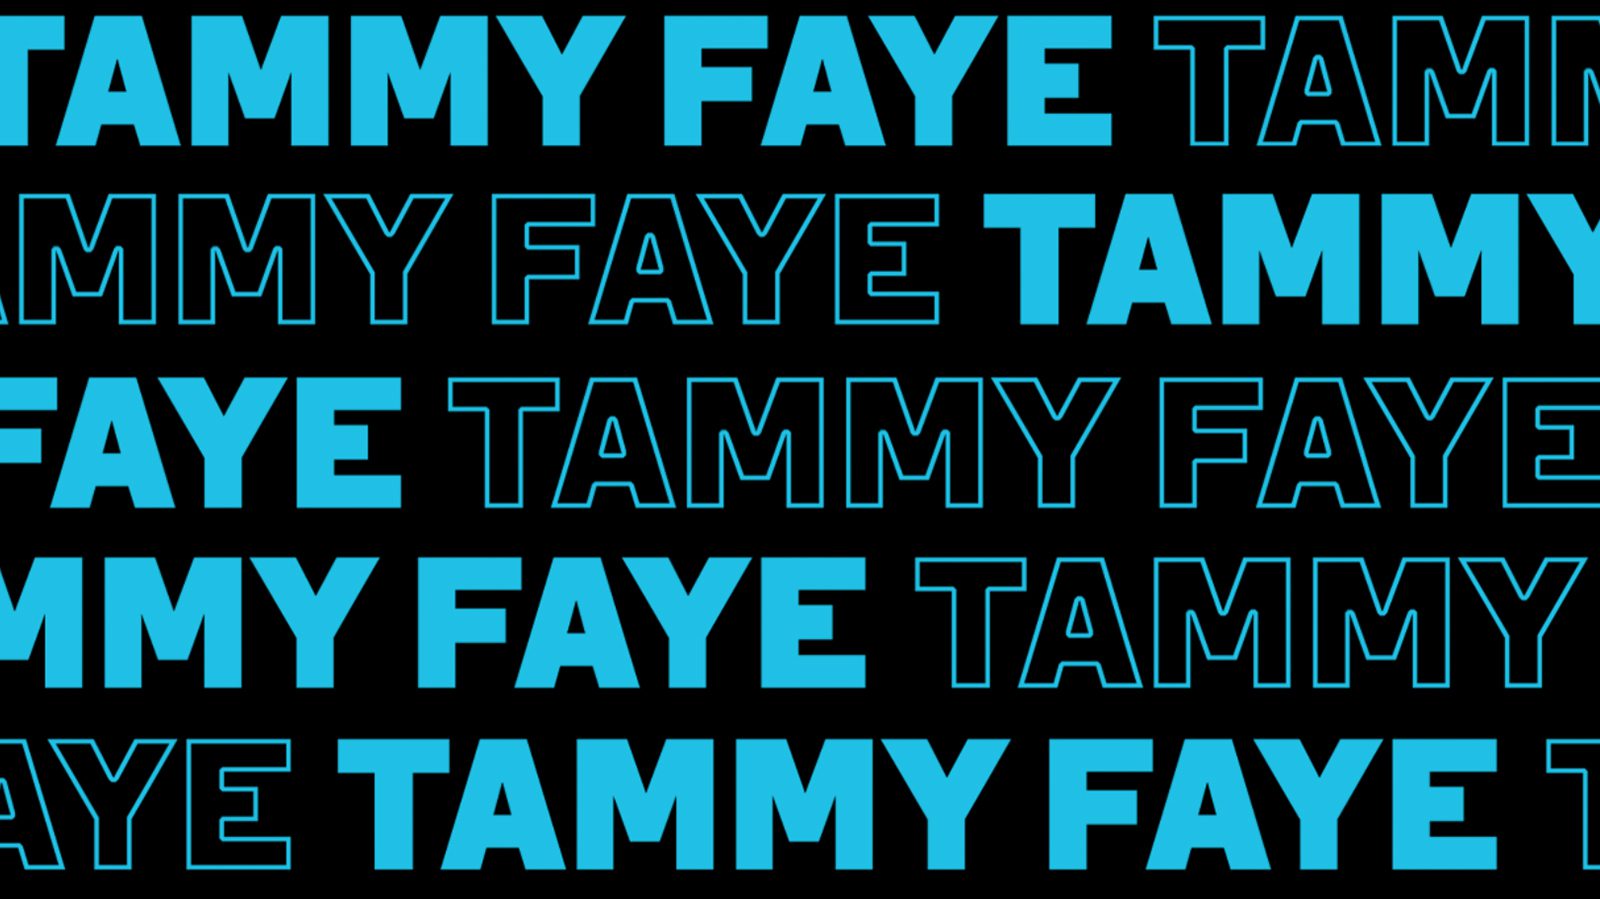 "Tammy Fay" promotion for the Almeida Theater in North London.  Screenshot